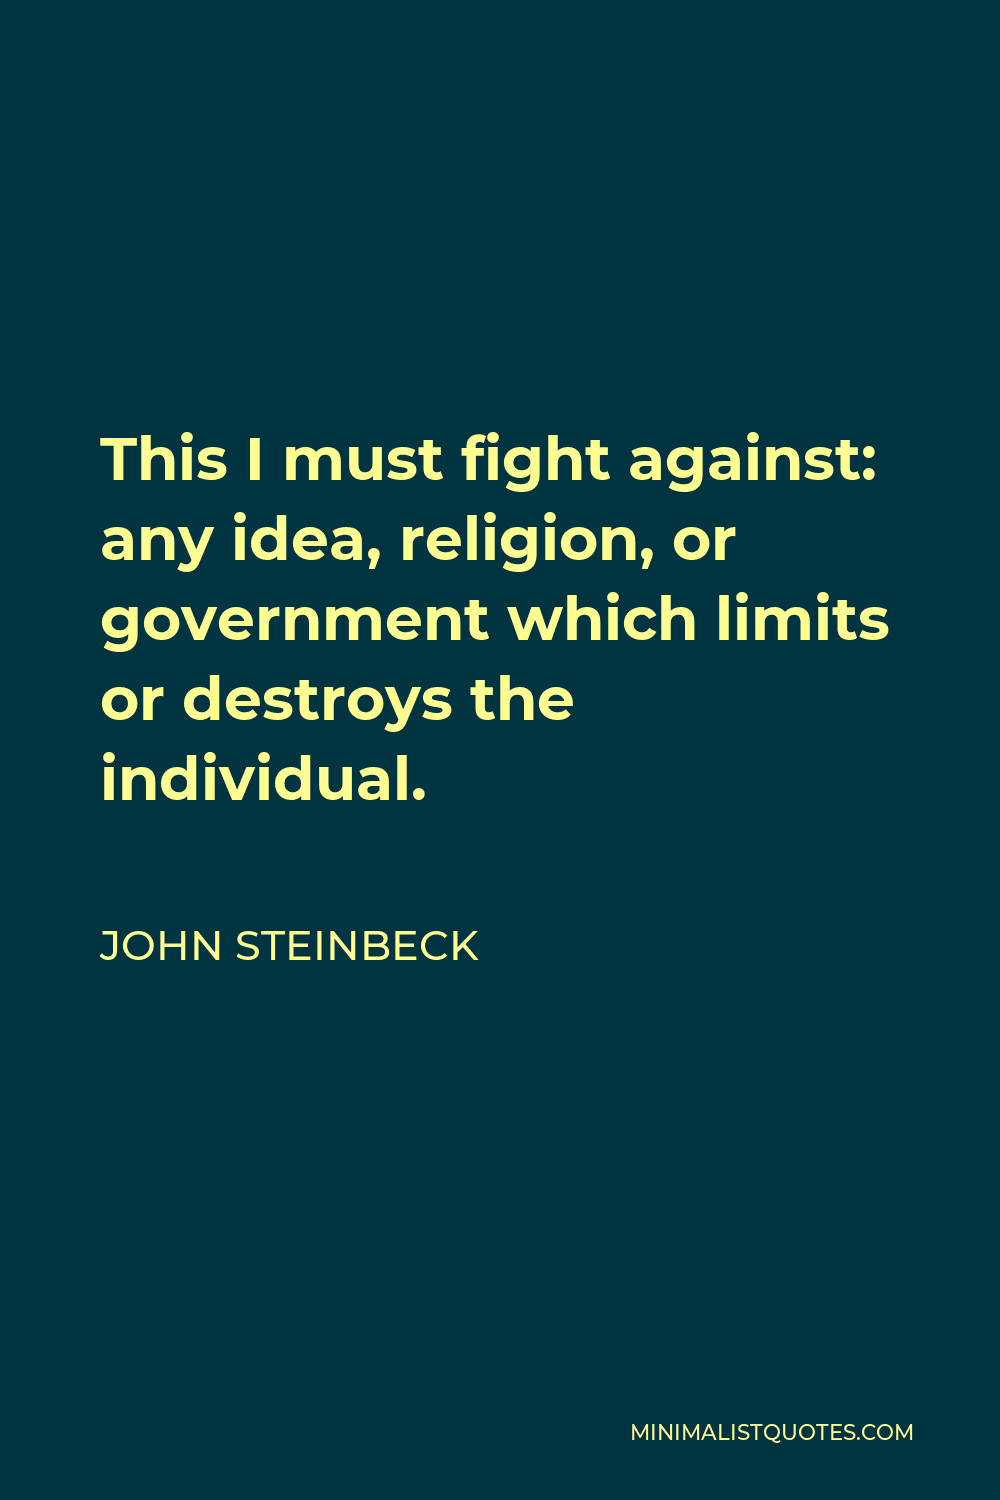 John Steinbeck Quote - This I must fight against: any idea, religion, or government which limits or destroys the individual.